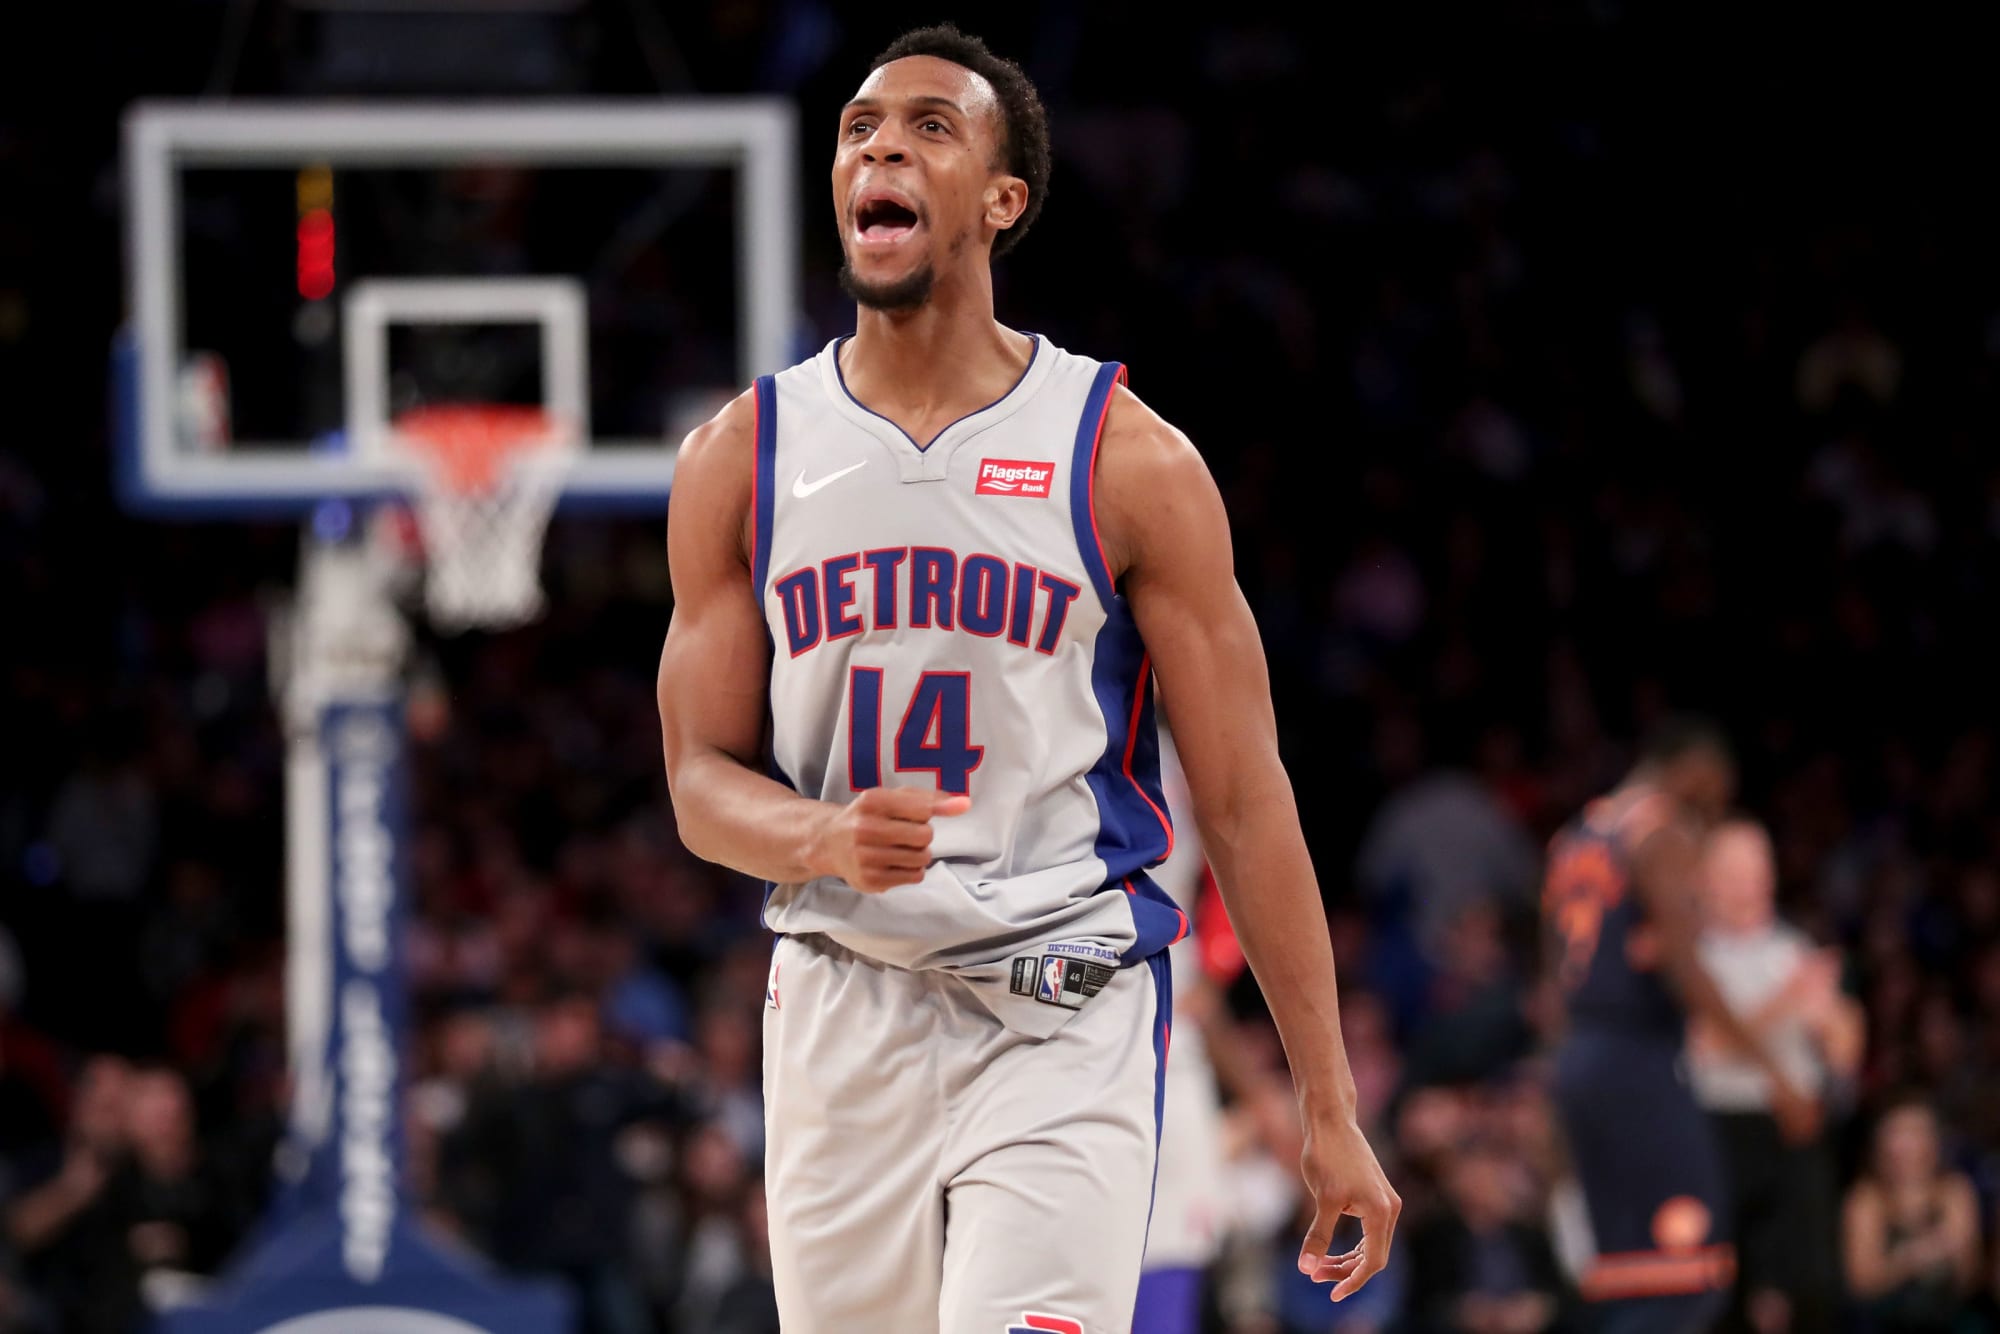 Ish Smith of the Detroit Pistons helps introduce two new uniforms by  Fotografía de noticias - Getty Images